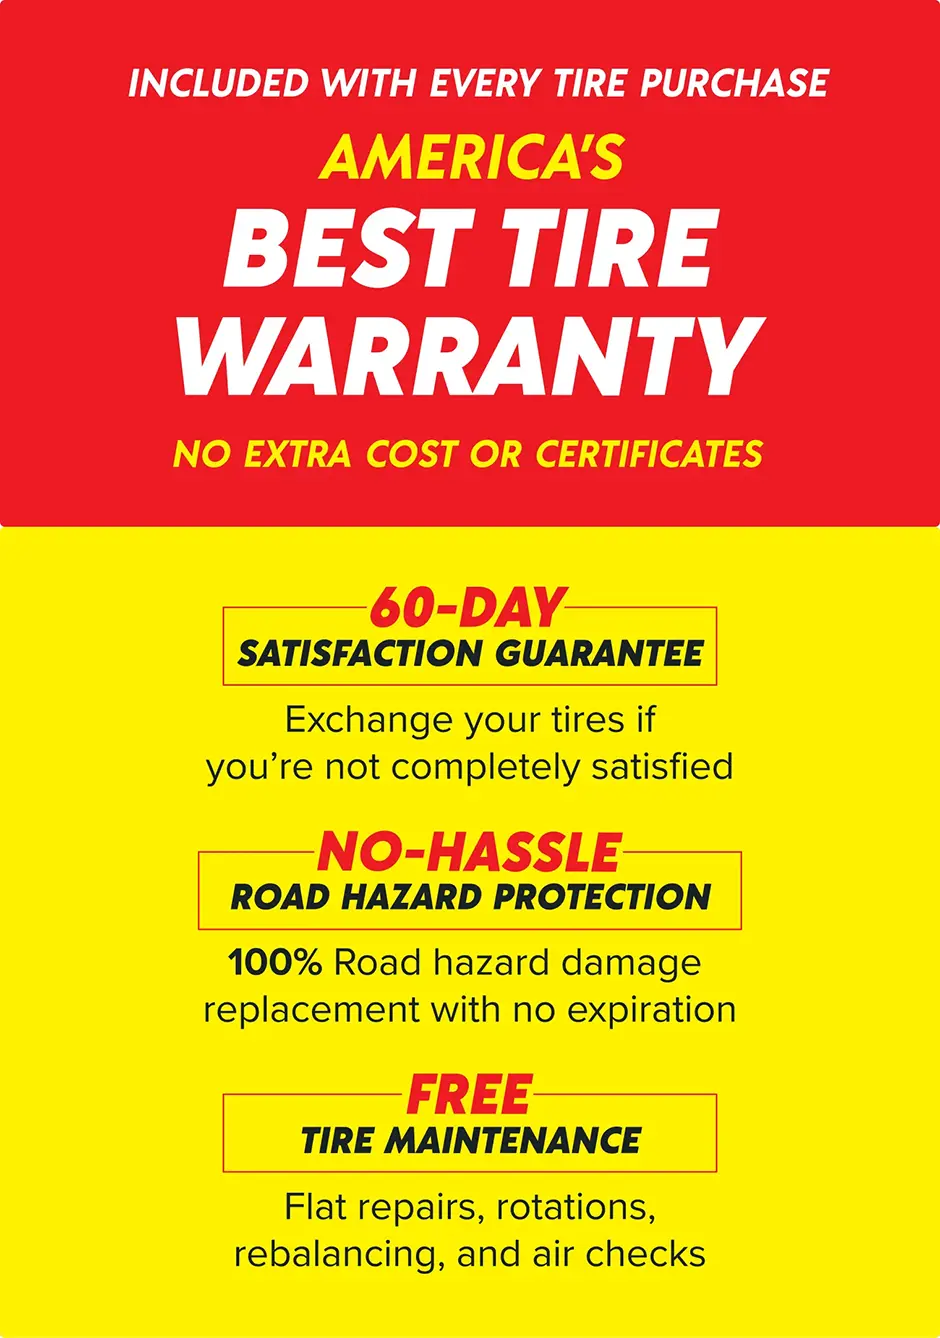 Included with every tire purchase. America's Best Tire Warranty: No extra cost or certificates. 60-Day Satisfaction Guarantee, No-Hassle Road Hazard Protection, Free Tire Maintenance.